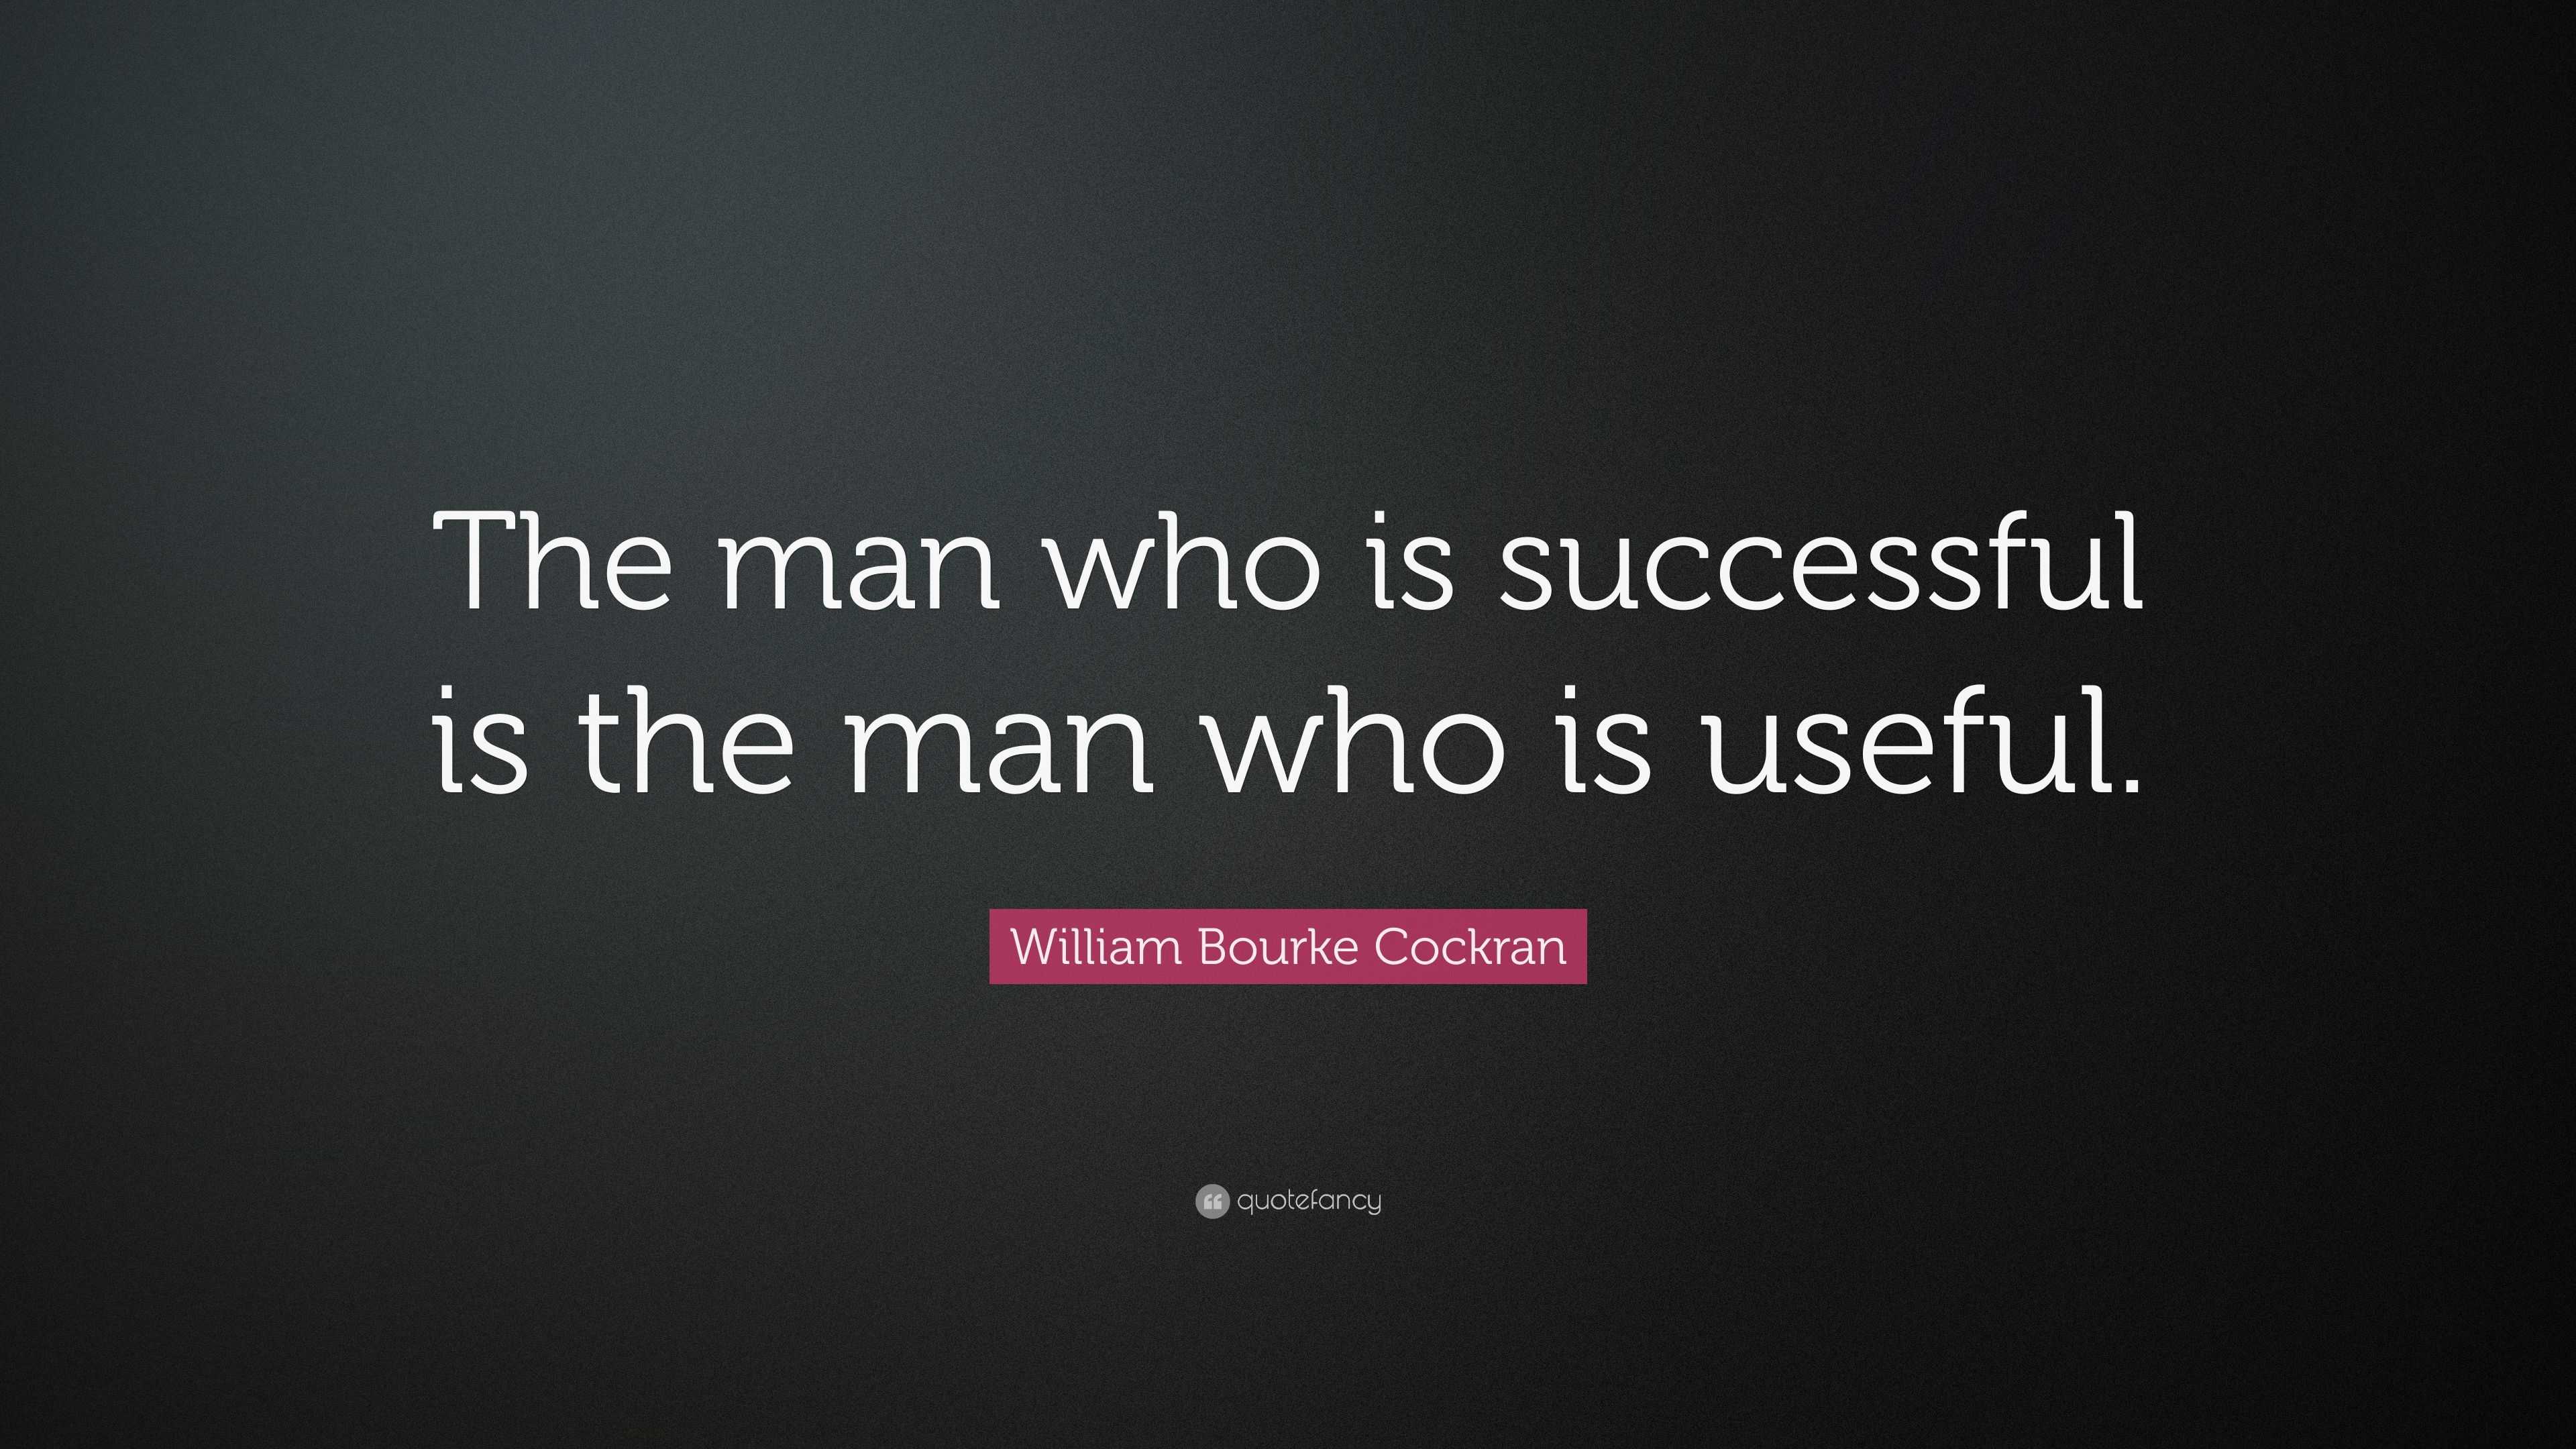 William Bourke Cockran Quote: “The man who is successful is the man who ...